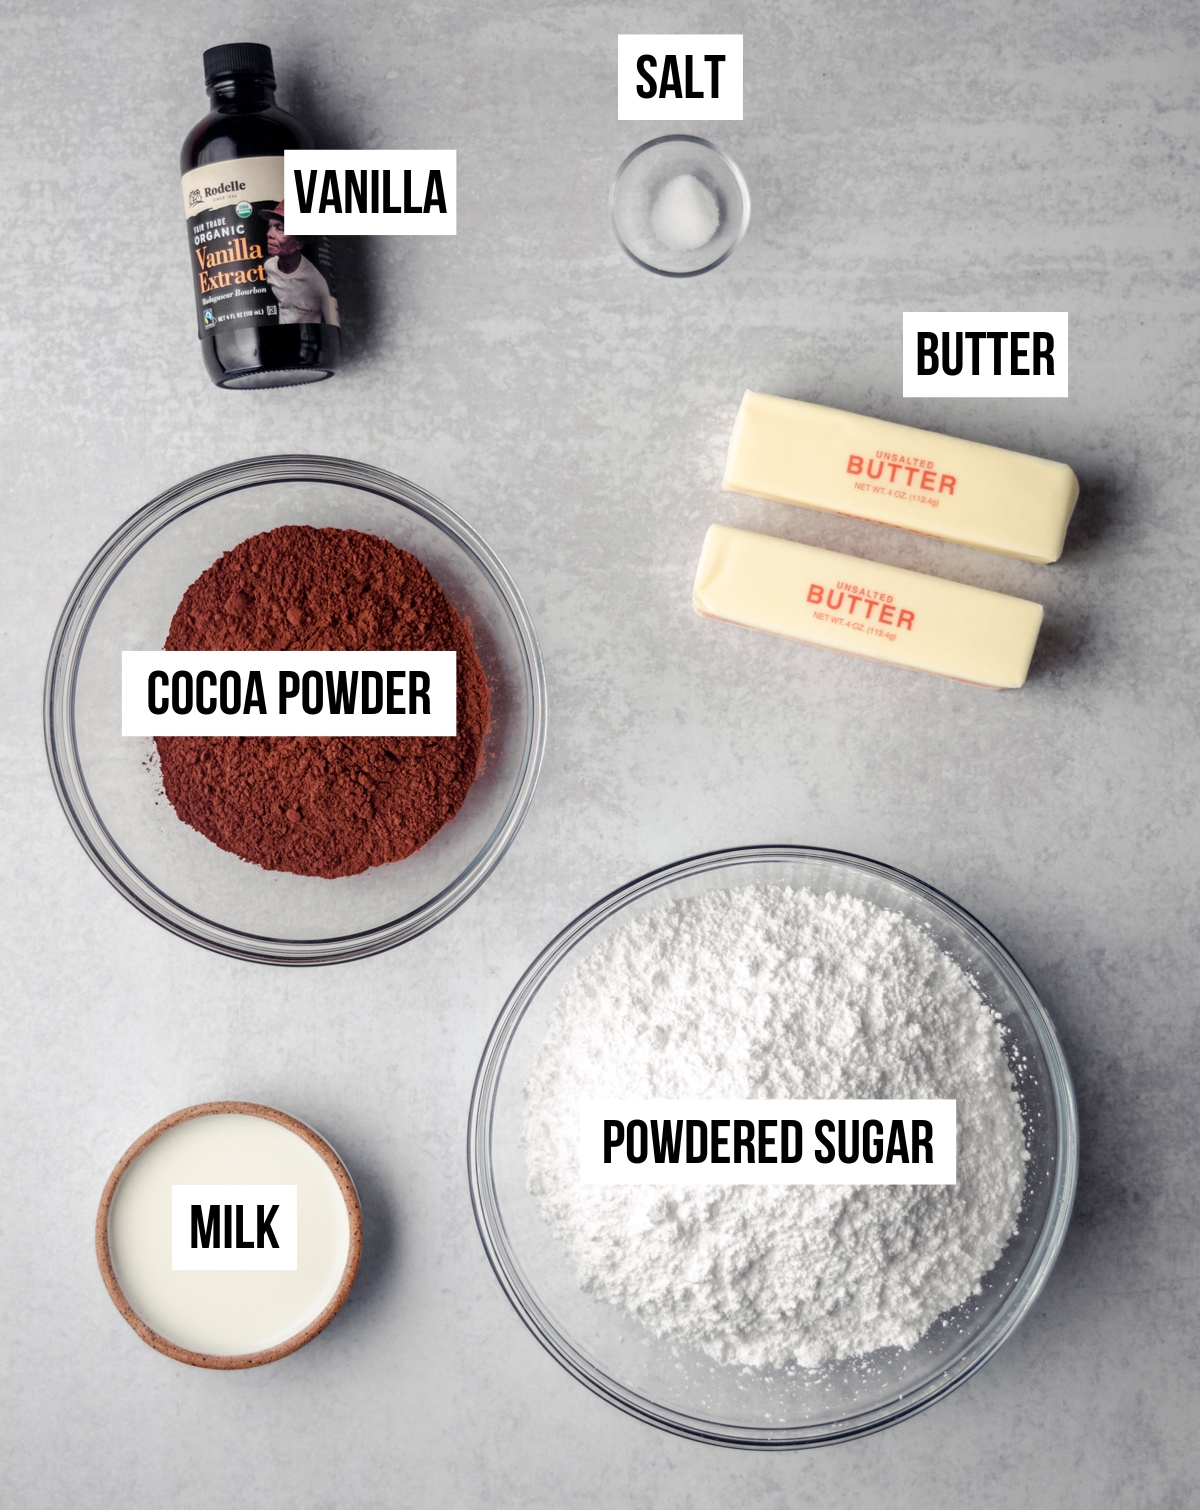 Ingredients for chocolate buttercream with text overlay.